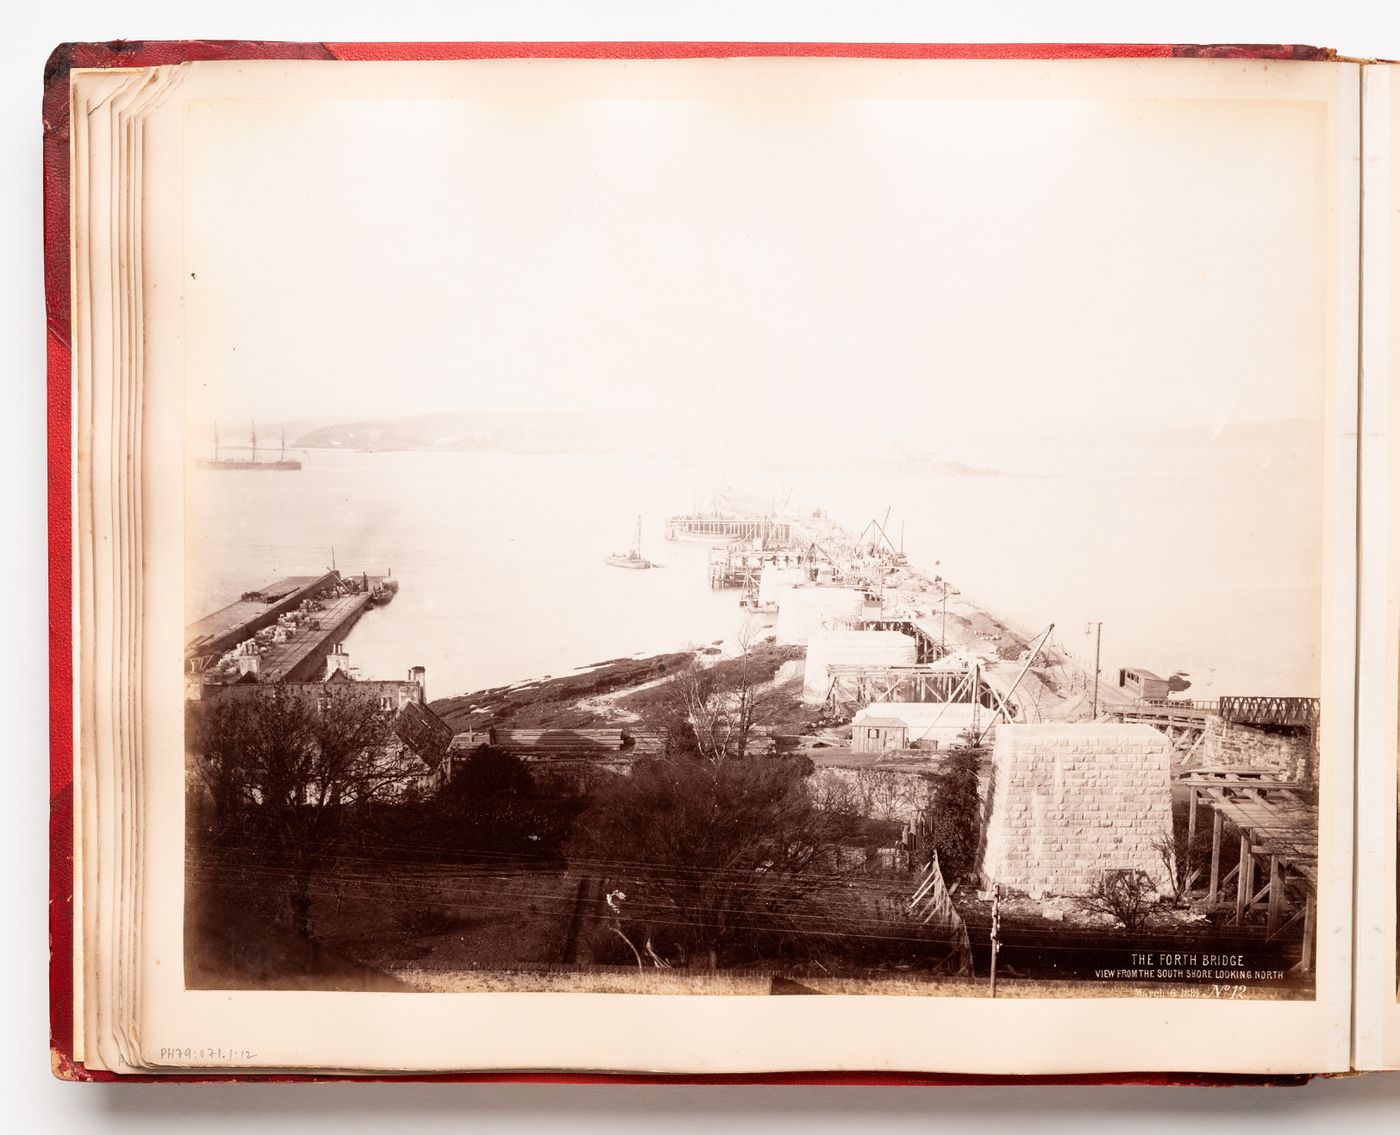 View of a building site for the construction of the Forth Bridge, Firth of Forth, Scotland, United Kingdom